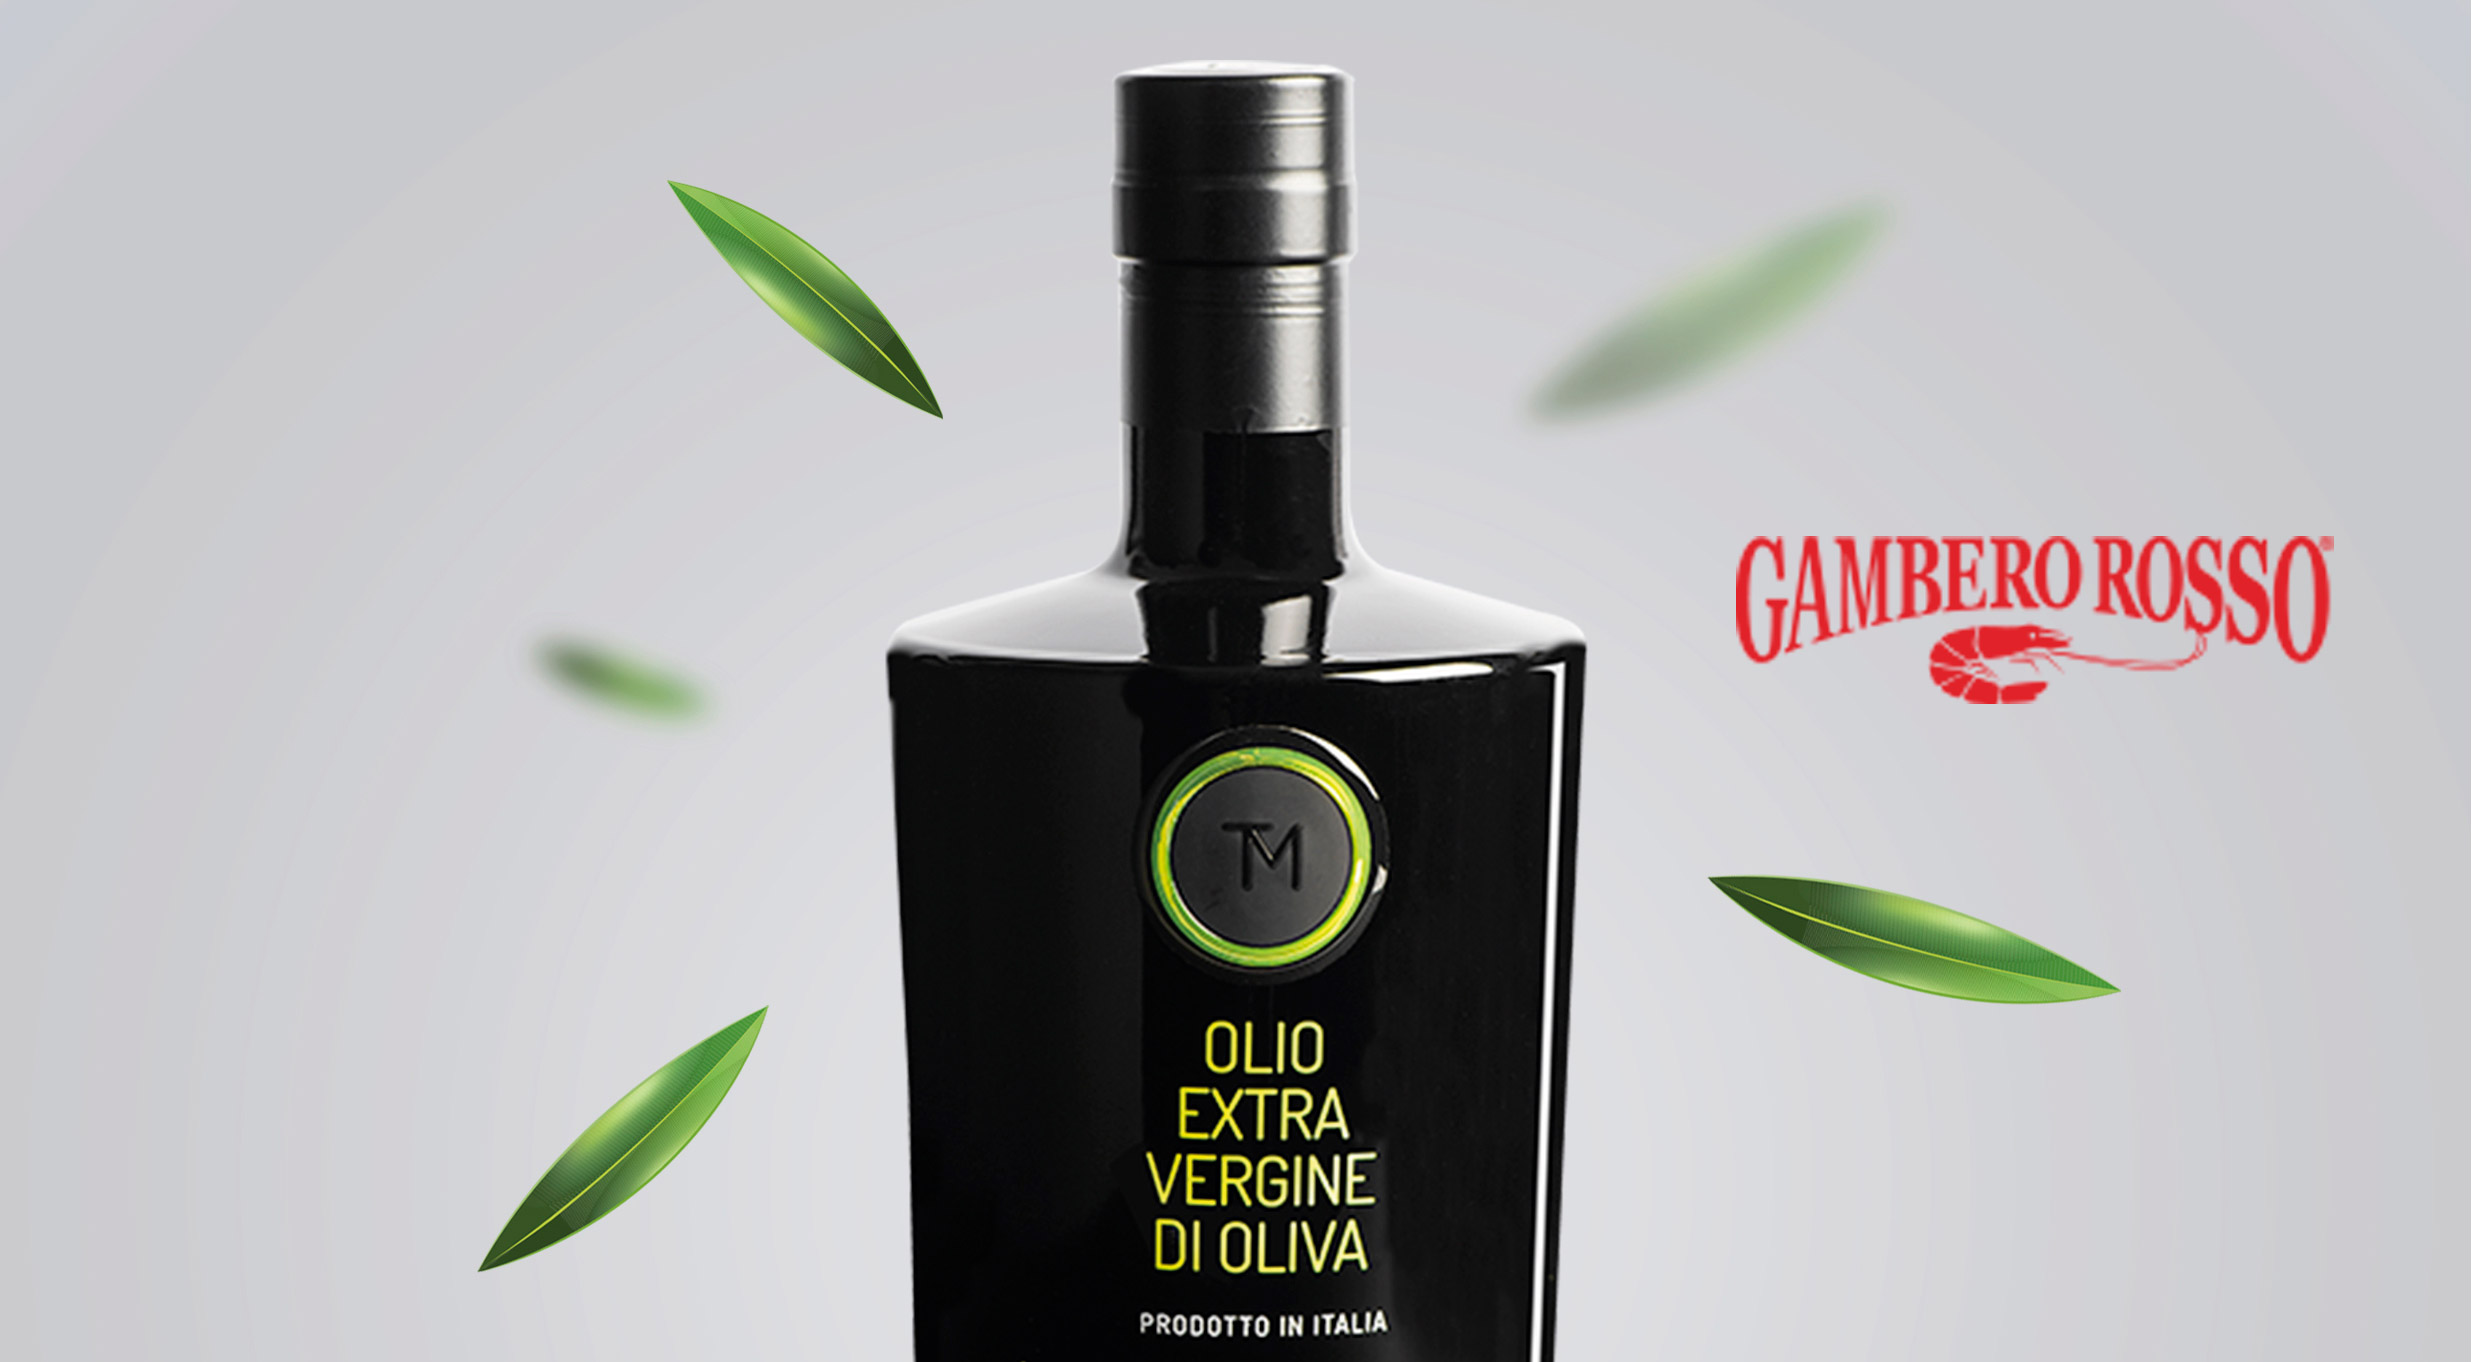 SPECIAL PRIZE BEST EXTRA VIRGIN OLIVE OIL MEDIUM FRUITY “GAMBERO ROSSO” 2020